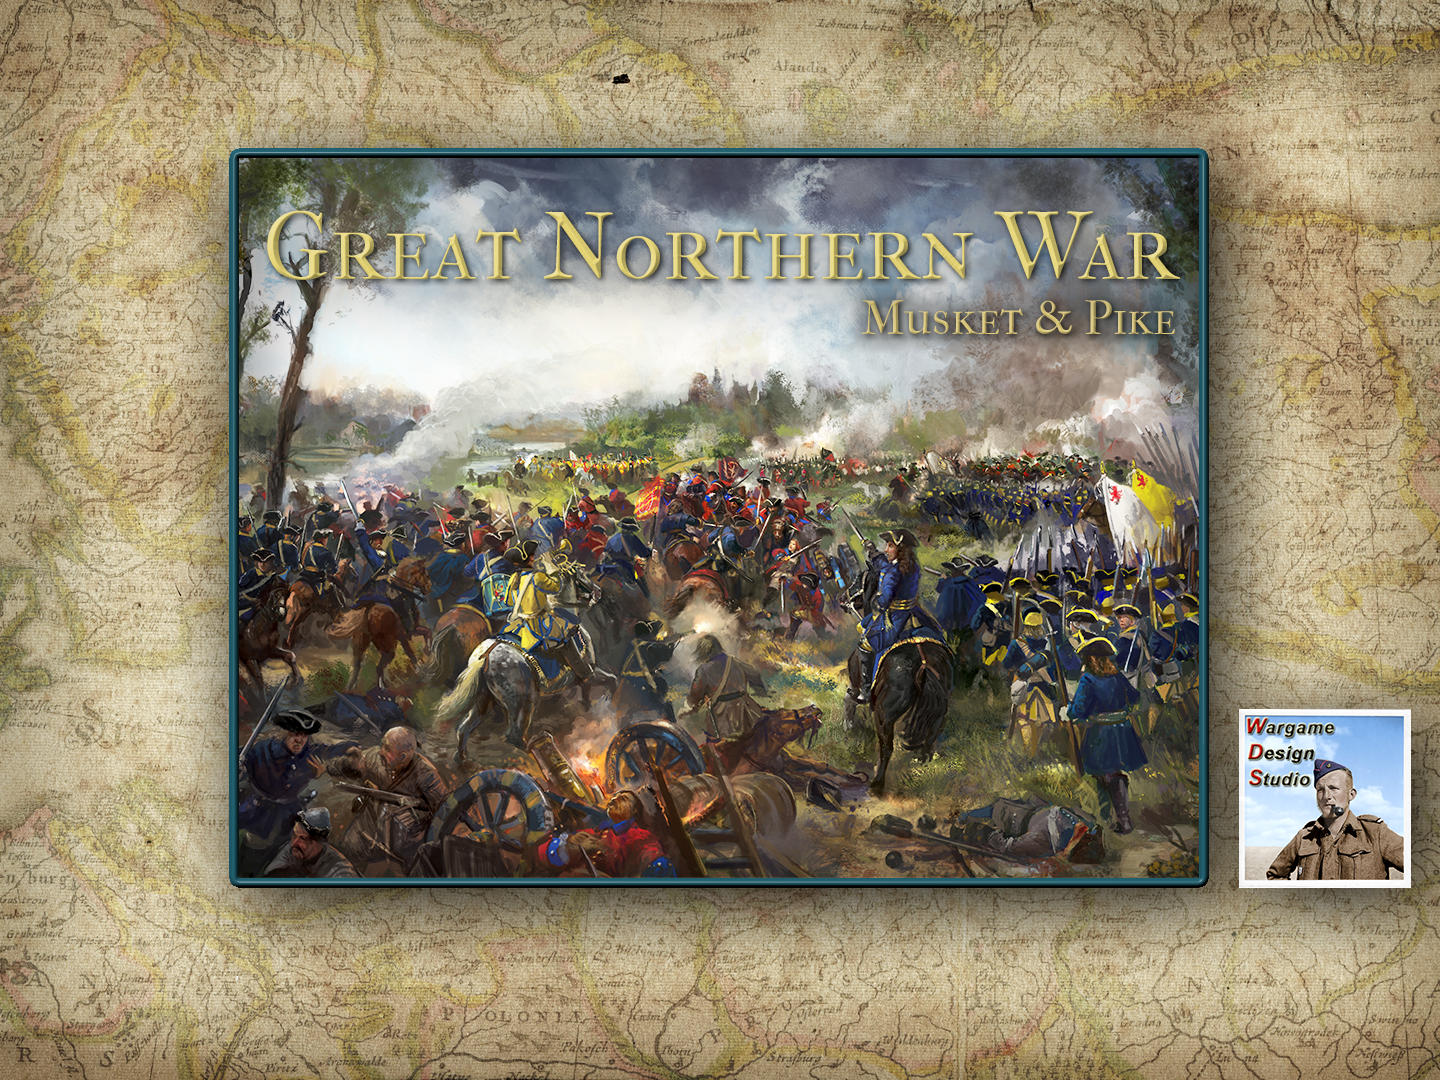 Musket & Pike – Great Northern War